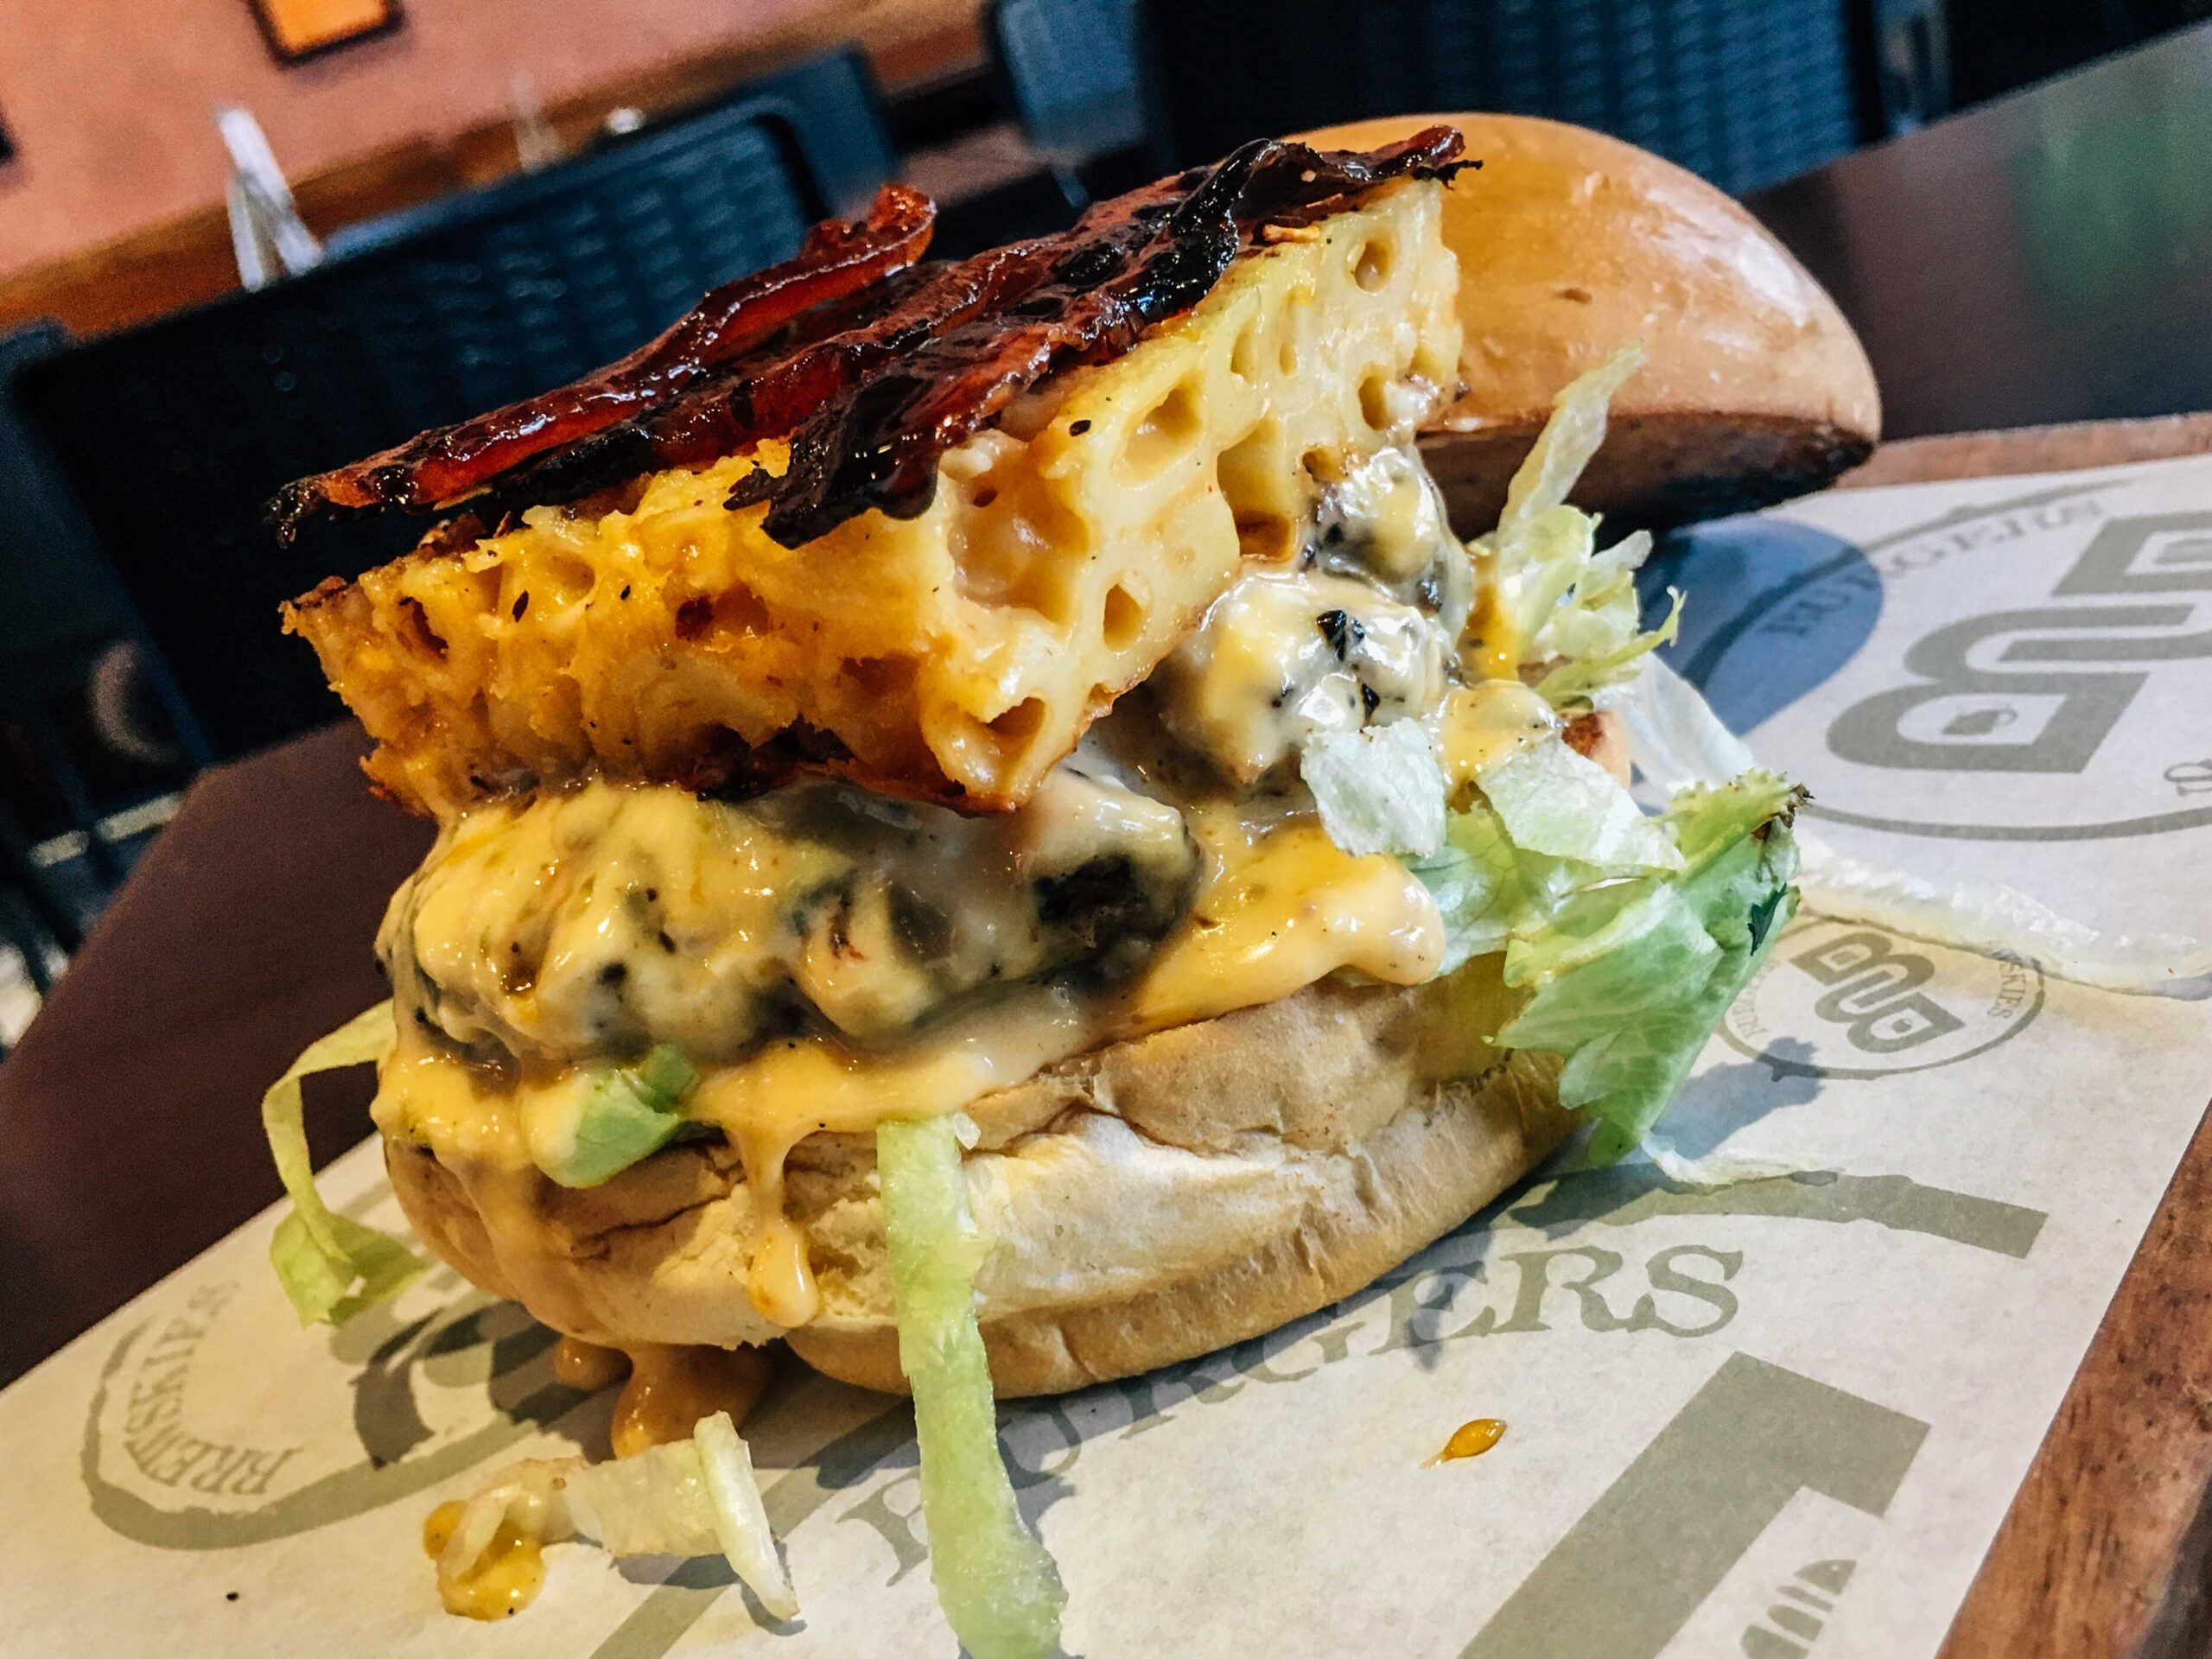 [What I Ate] A huge cheeseburger that will make you ‘Call The Nurse’